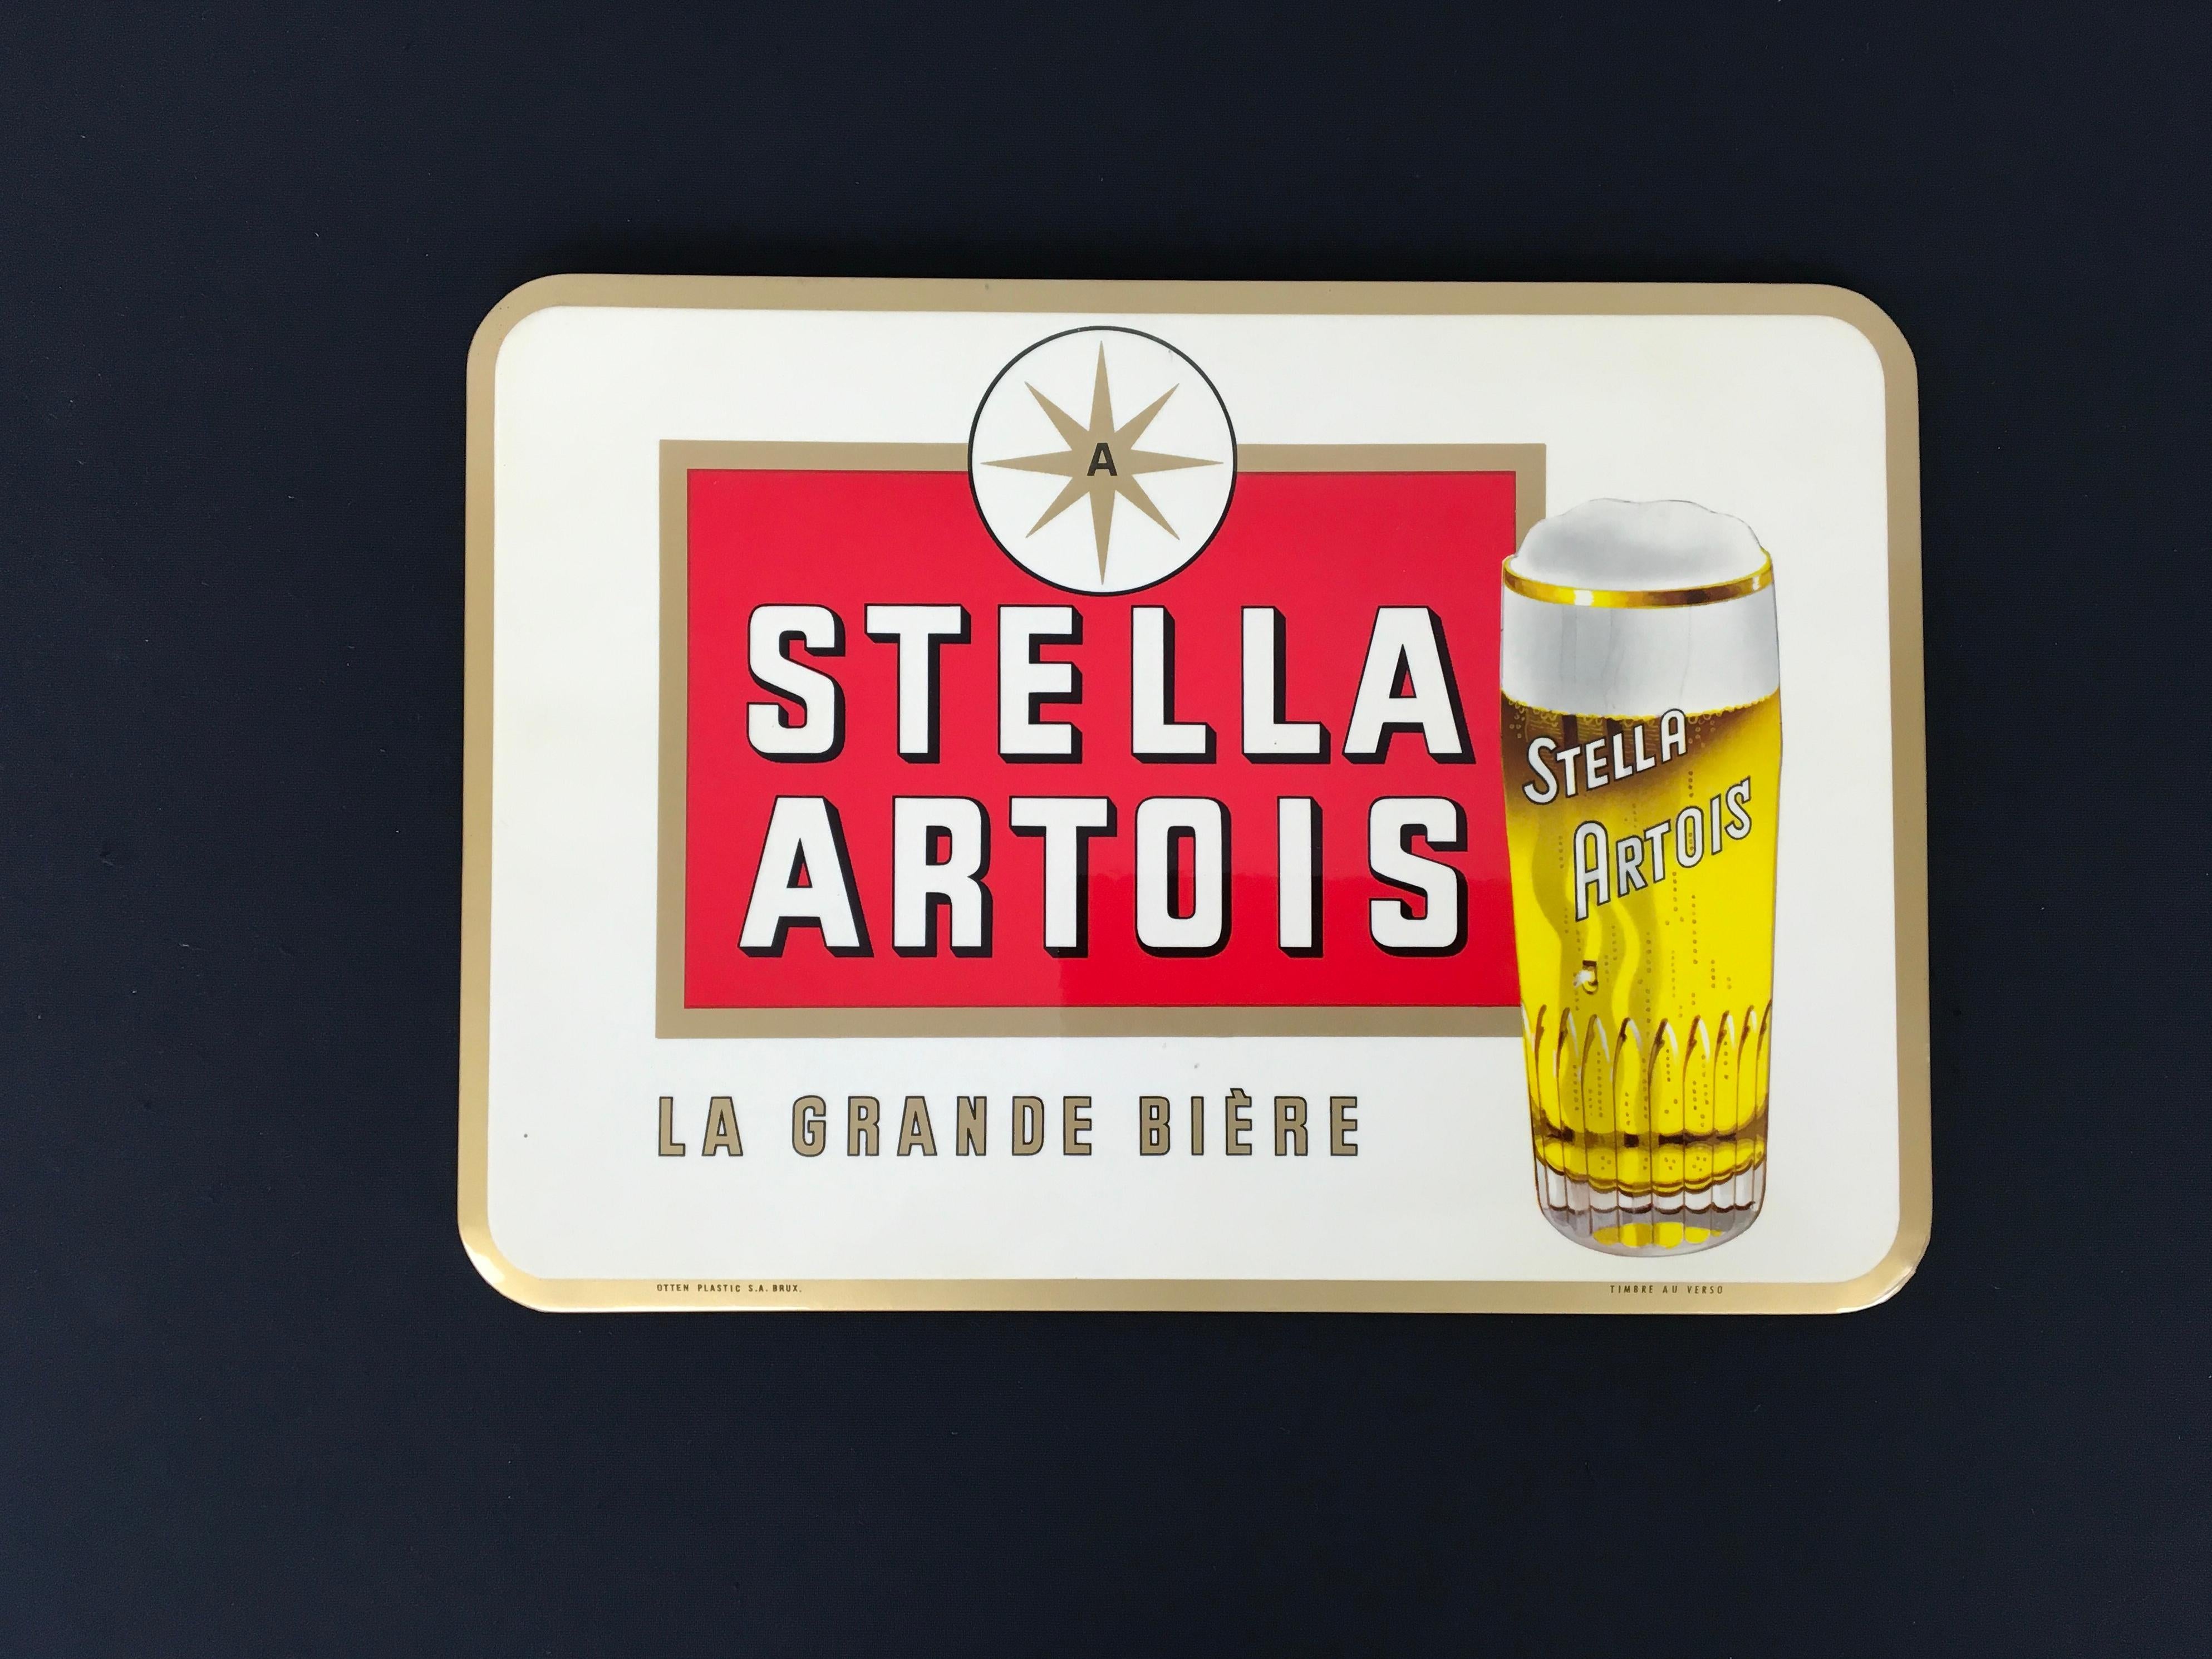 1960s Beer sign for the Belgian Beer Brand Stella Artois.
This Beer Sign was made by the Company Rob Otten which was located in Brussels. It's a glacoid sign mounted on cardboard. With original tax stamp at the back.

This vintage beer sign has a